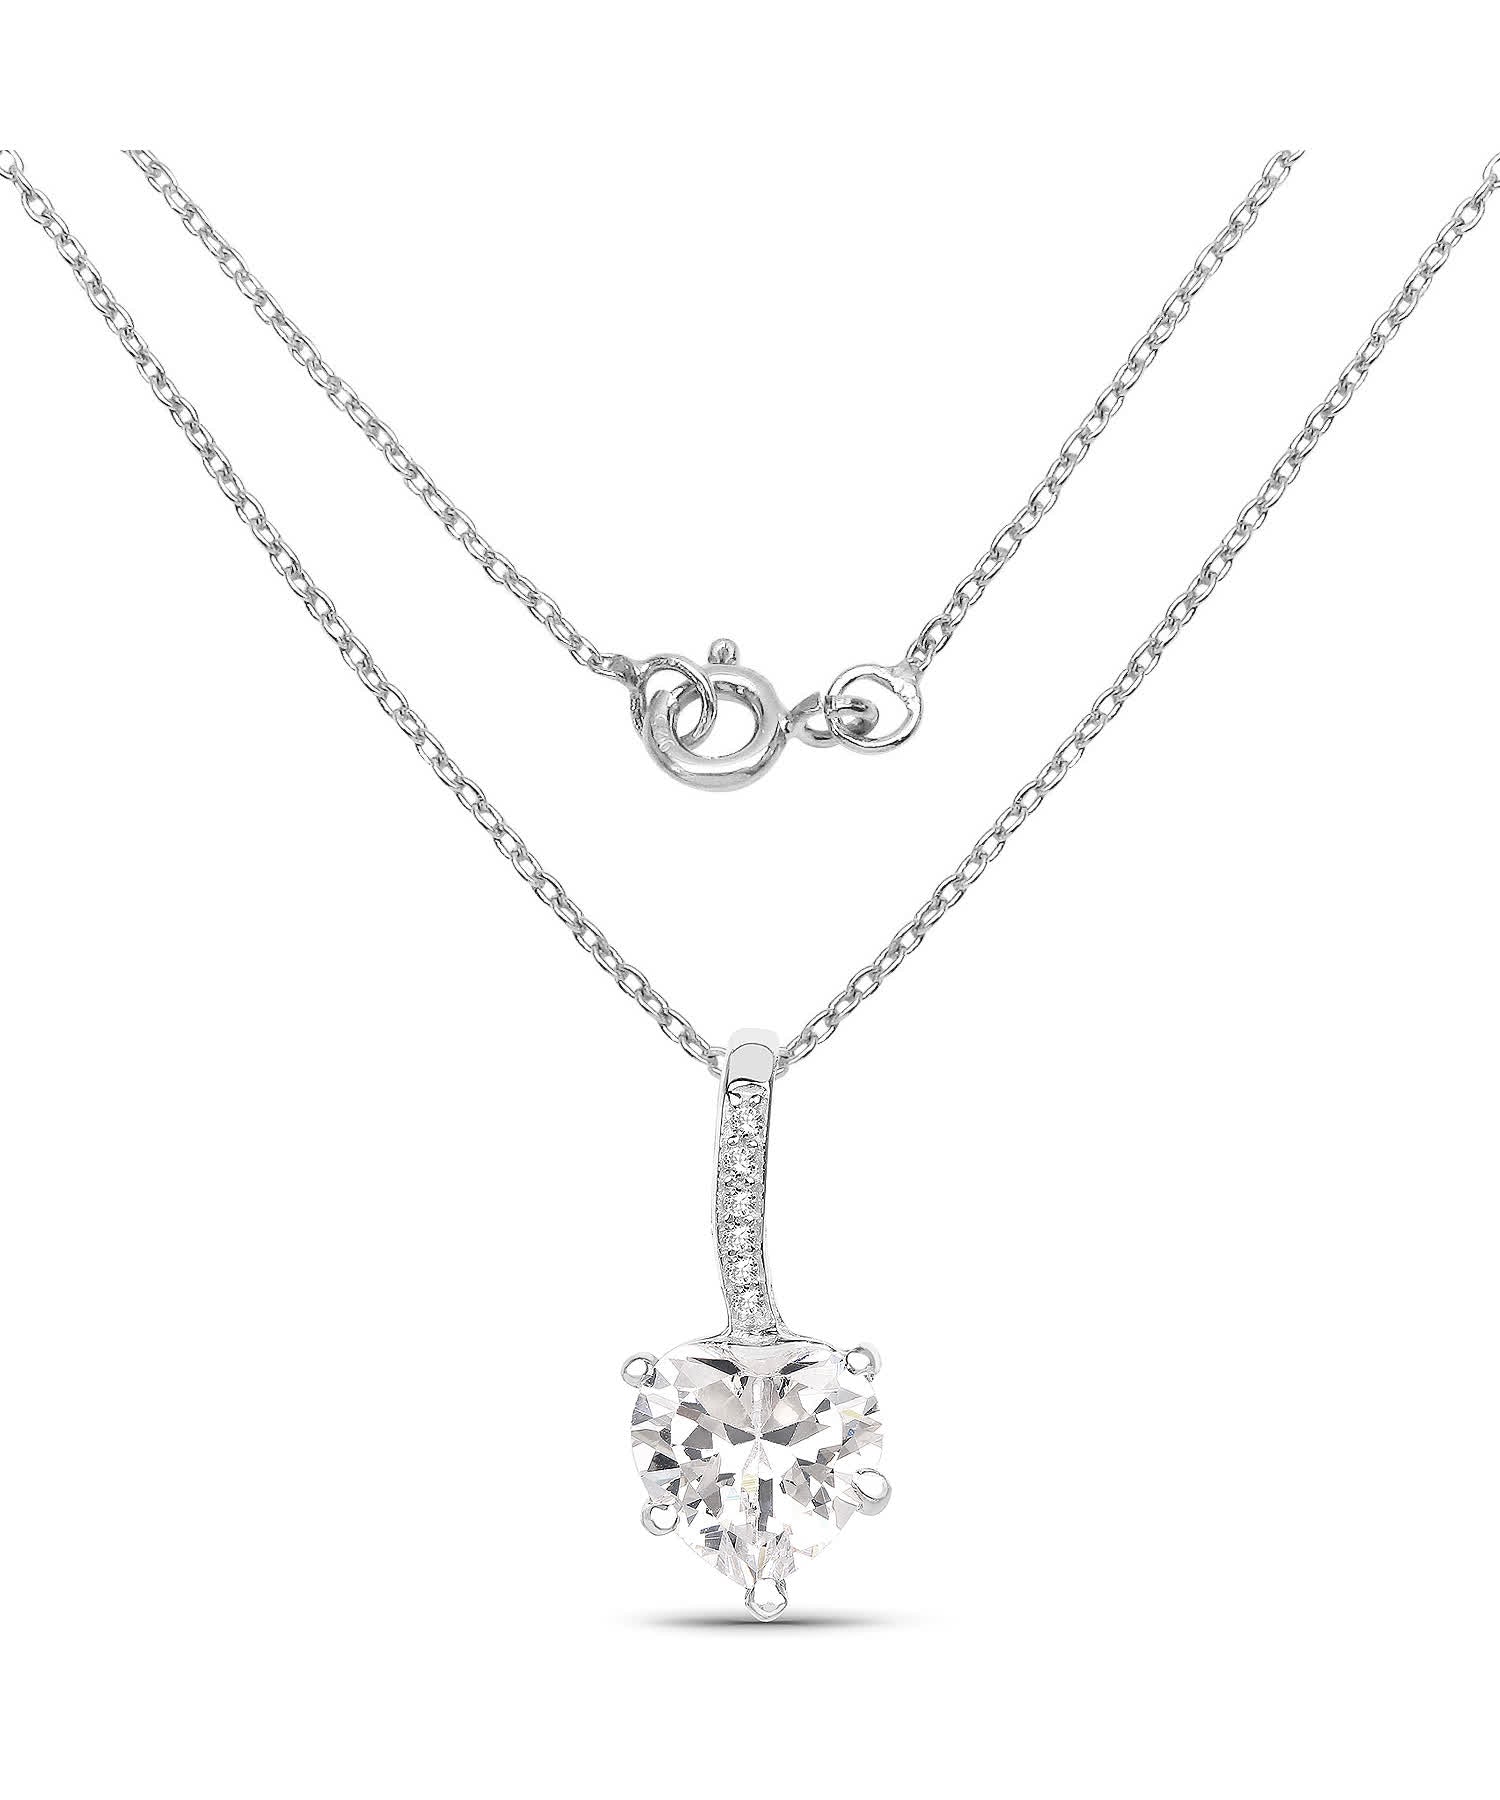 Brilliant Cut Cubic Zirconia Rhodium Plated 925 Sterling Silver Heart Pendant With Chain View 2